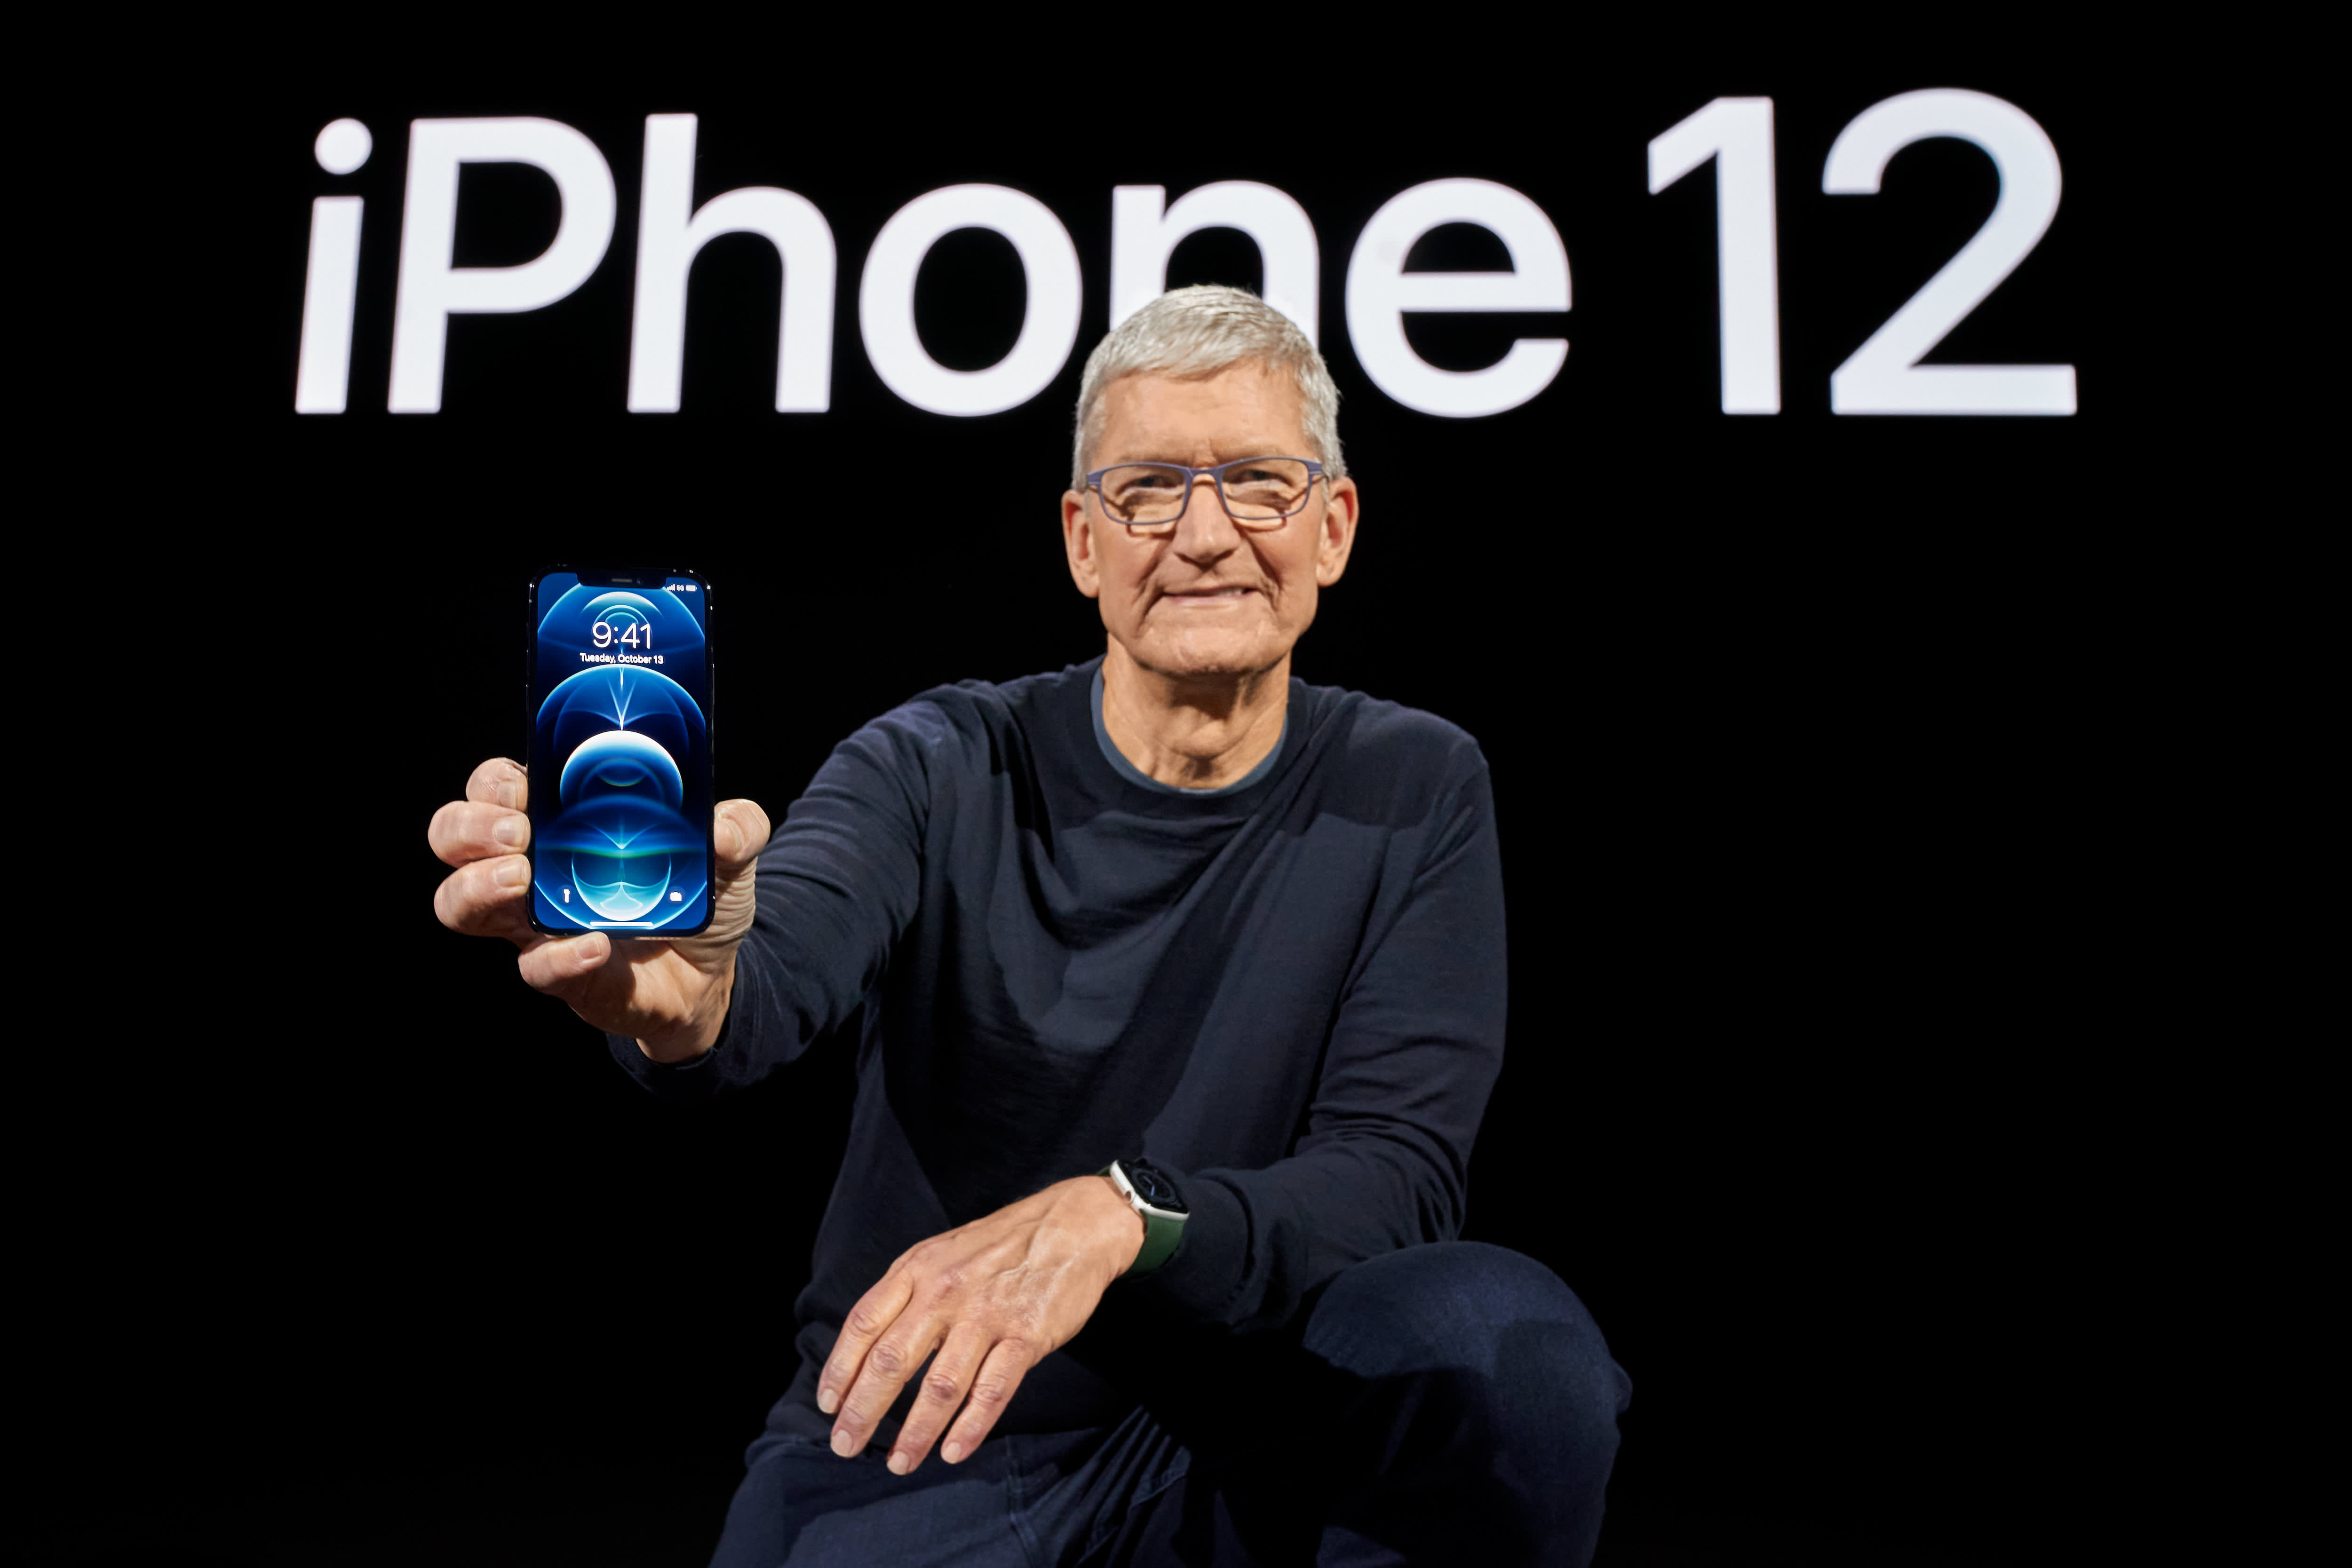 Apple announces iPhone 12 and iPhone 12 mini: A new era for iPhone with 5G  - Apple